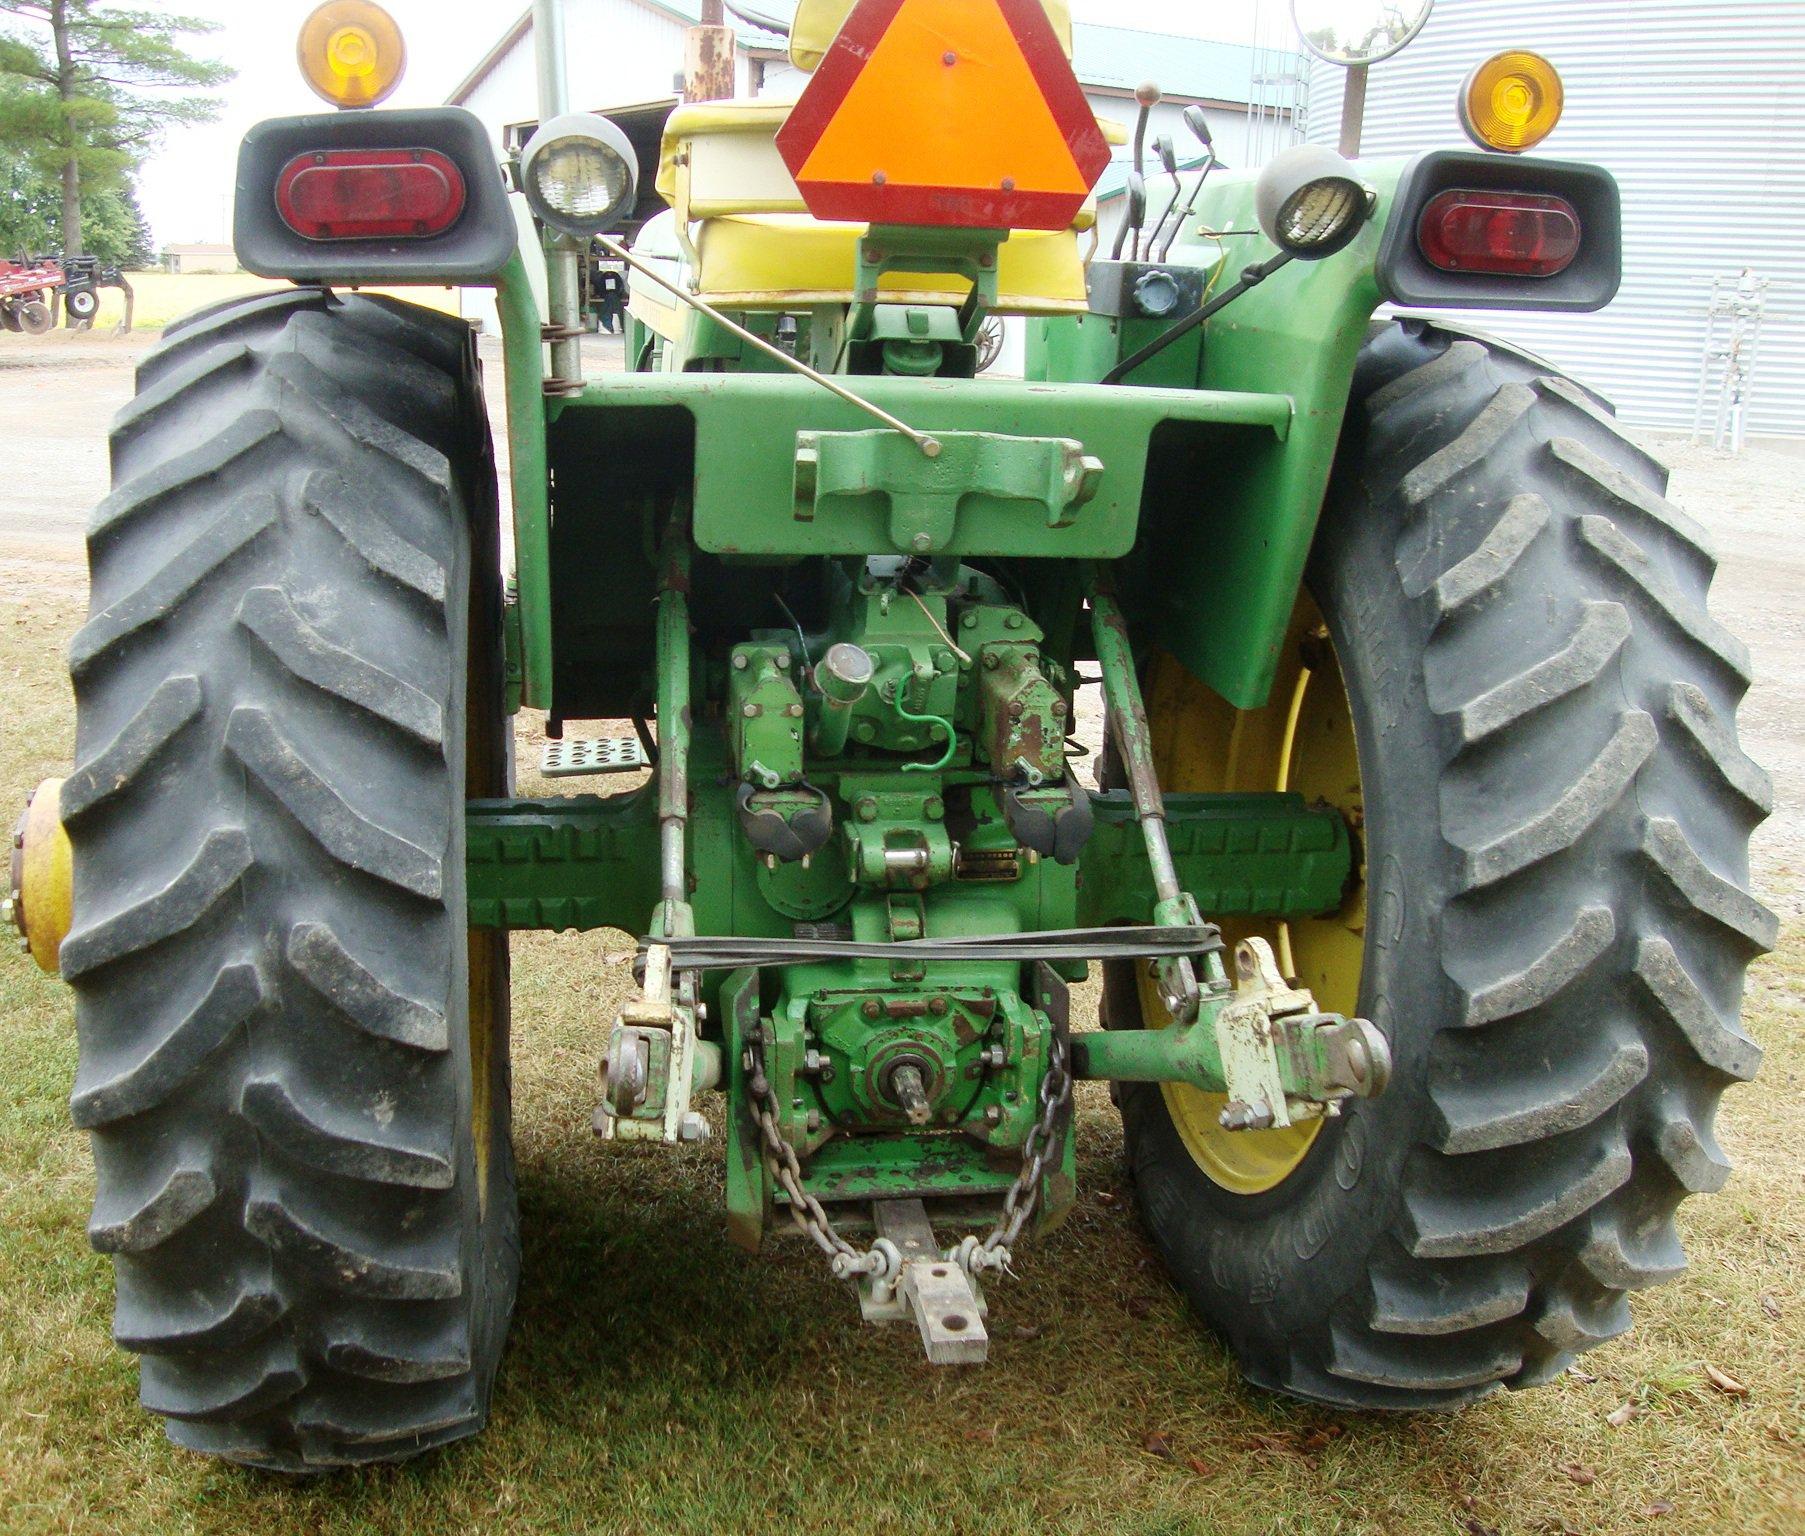 1975 JD 4230 2WD TRACTOR  OPEN STATION  6 940 HRS  QUAD RANGE  2 REMOTES  3 PT. PTO  16.9X38” AXLE D